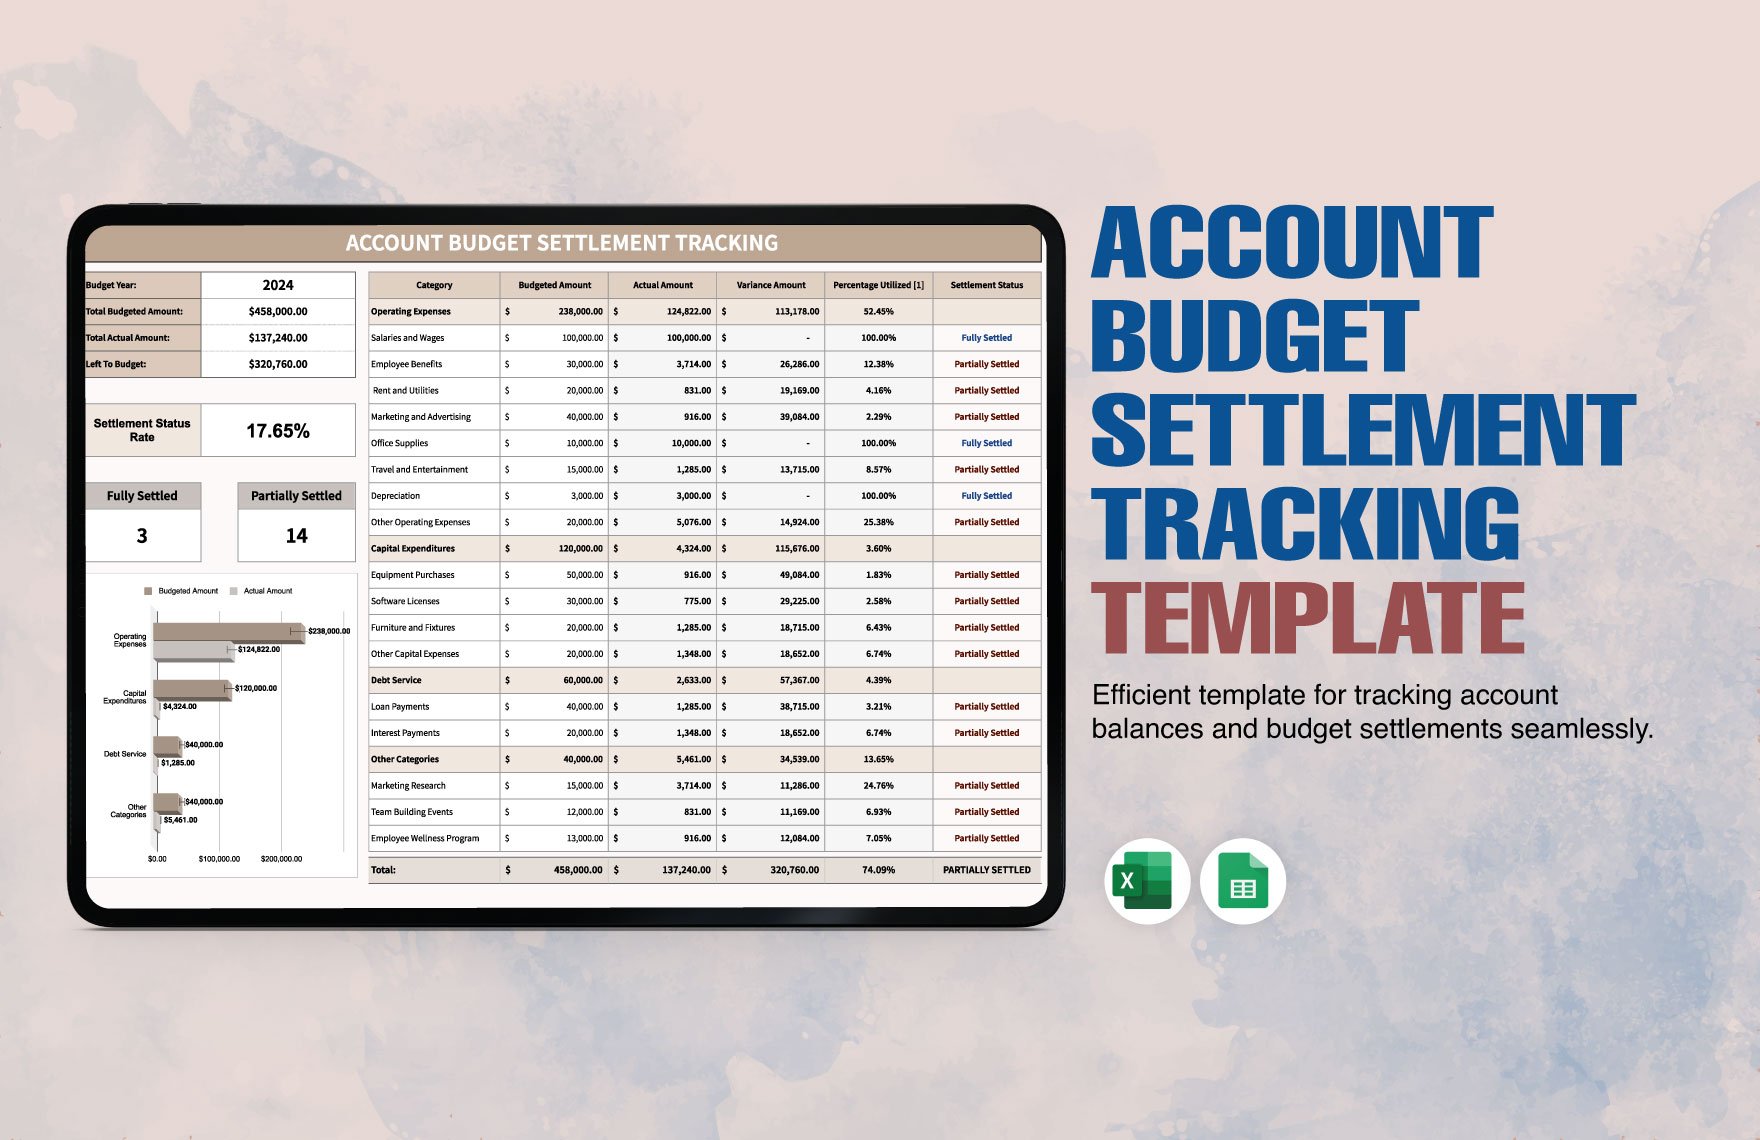 Account Budget Settlement Tracking Template in Excel, Google Sheets